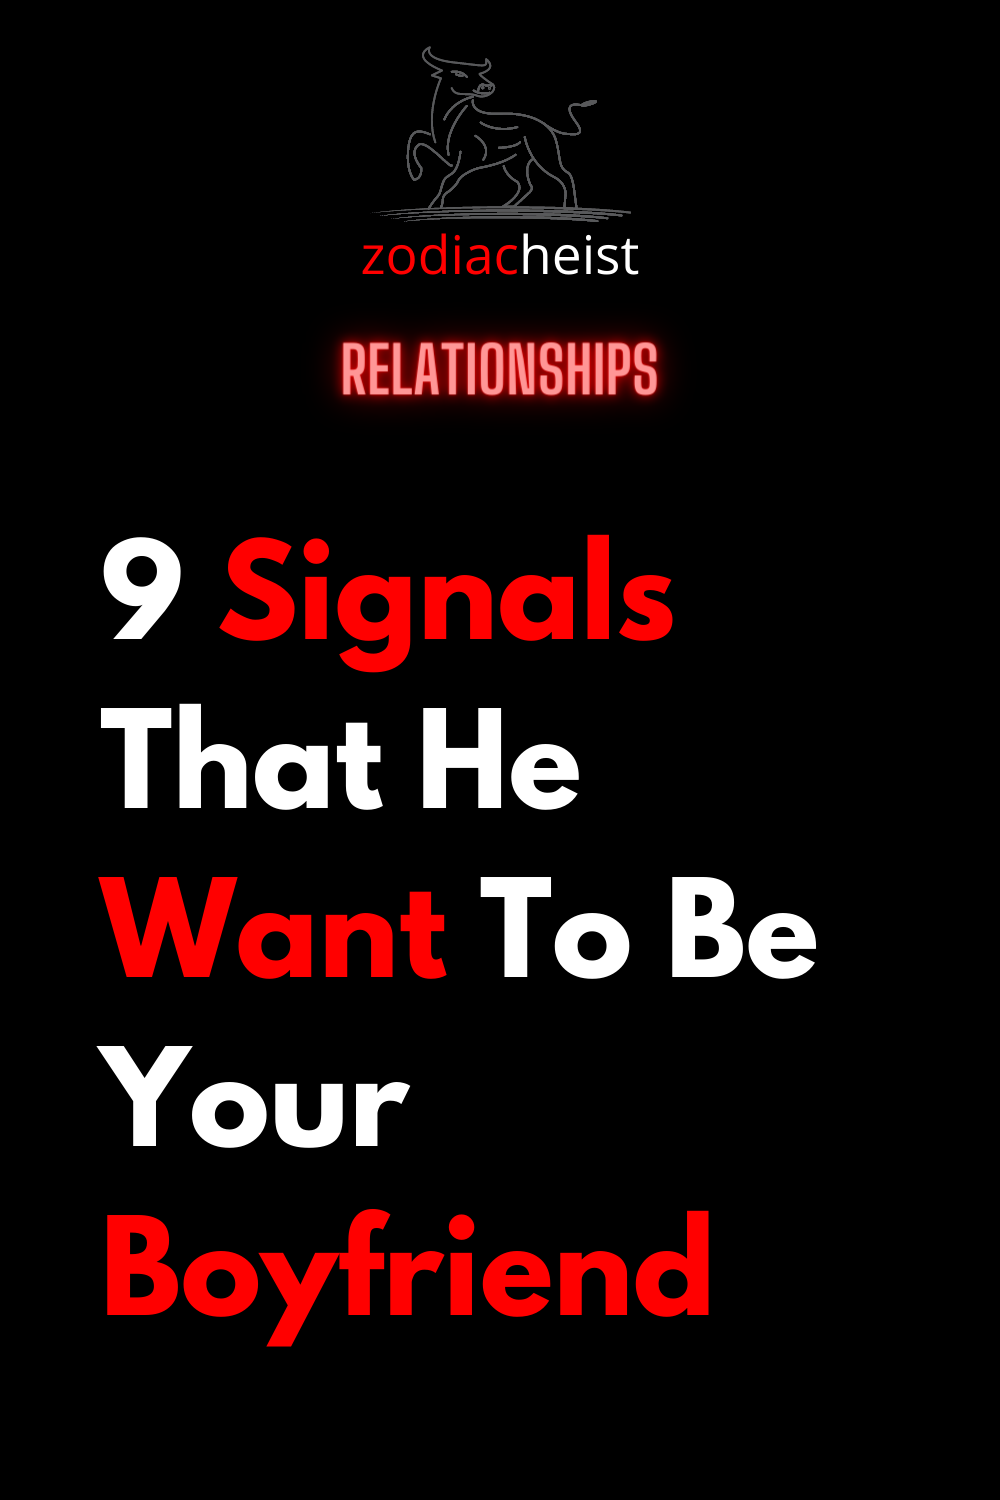 9 Signals That He Want To Be Your Boyfriend